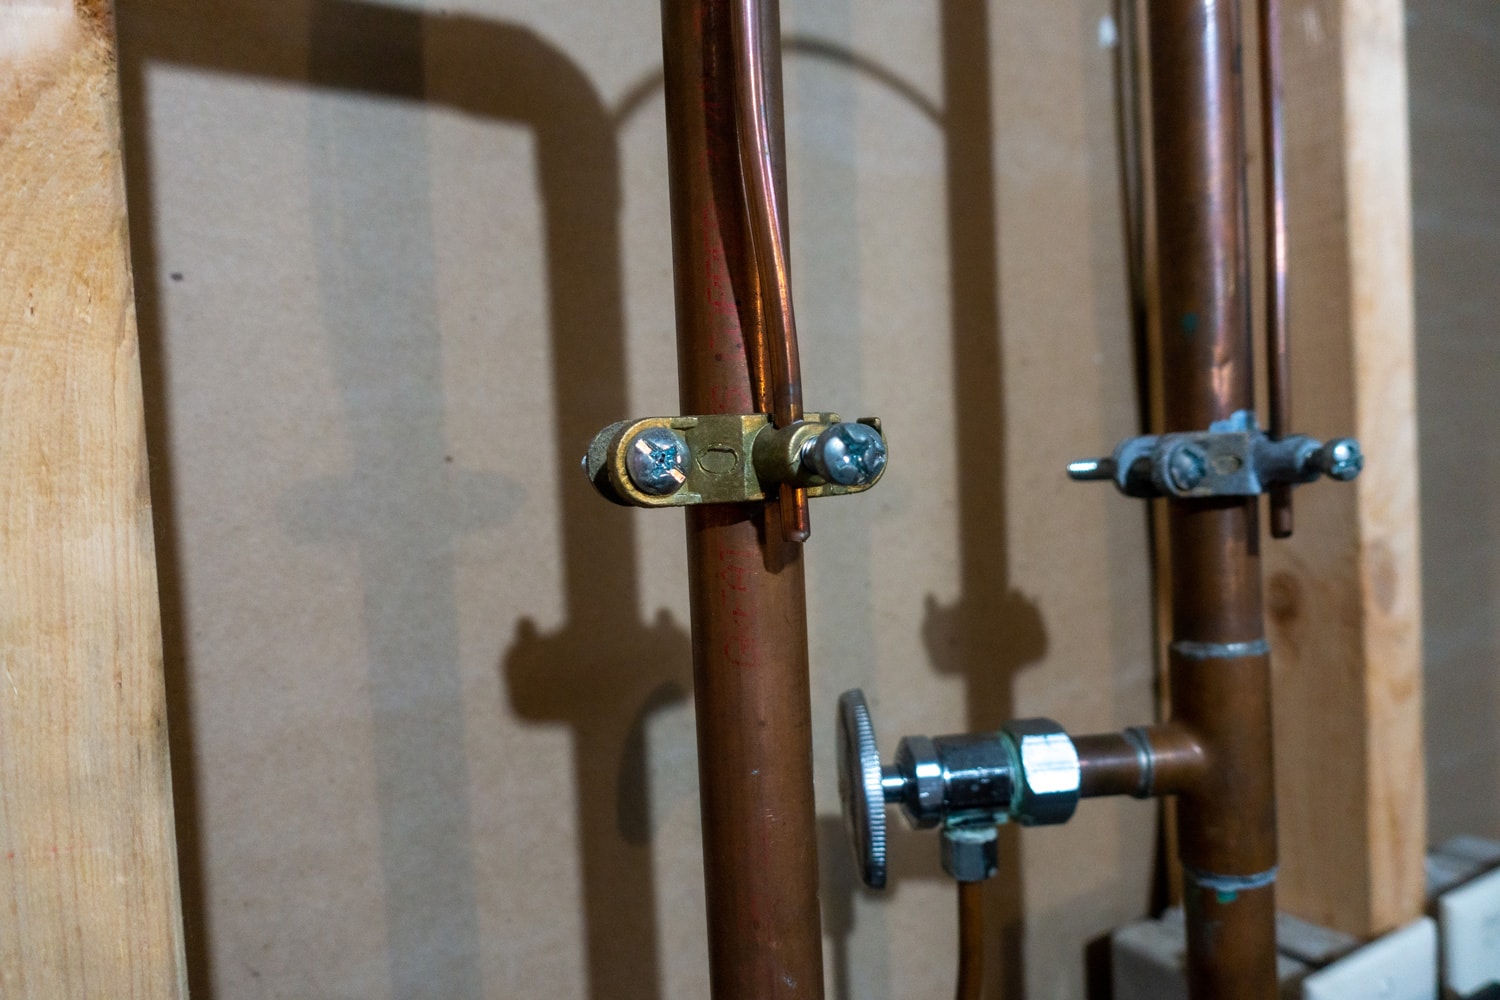 Typical electrical grounding done on metal piping to prevent a static charge or stray current